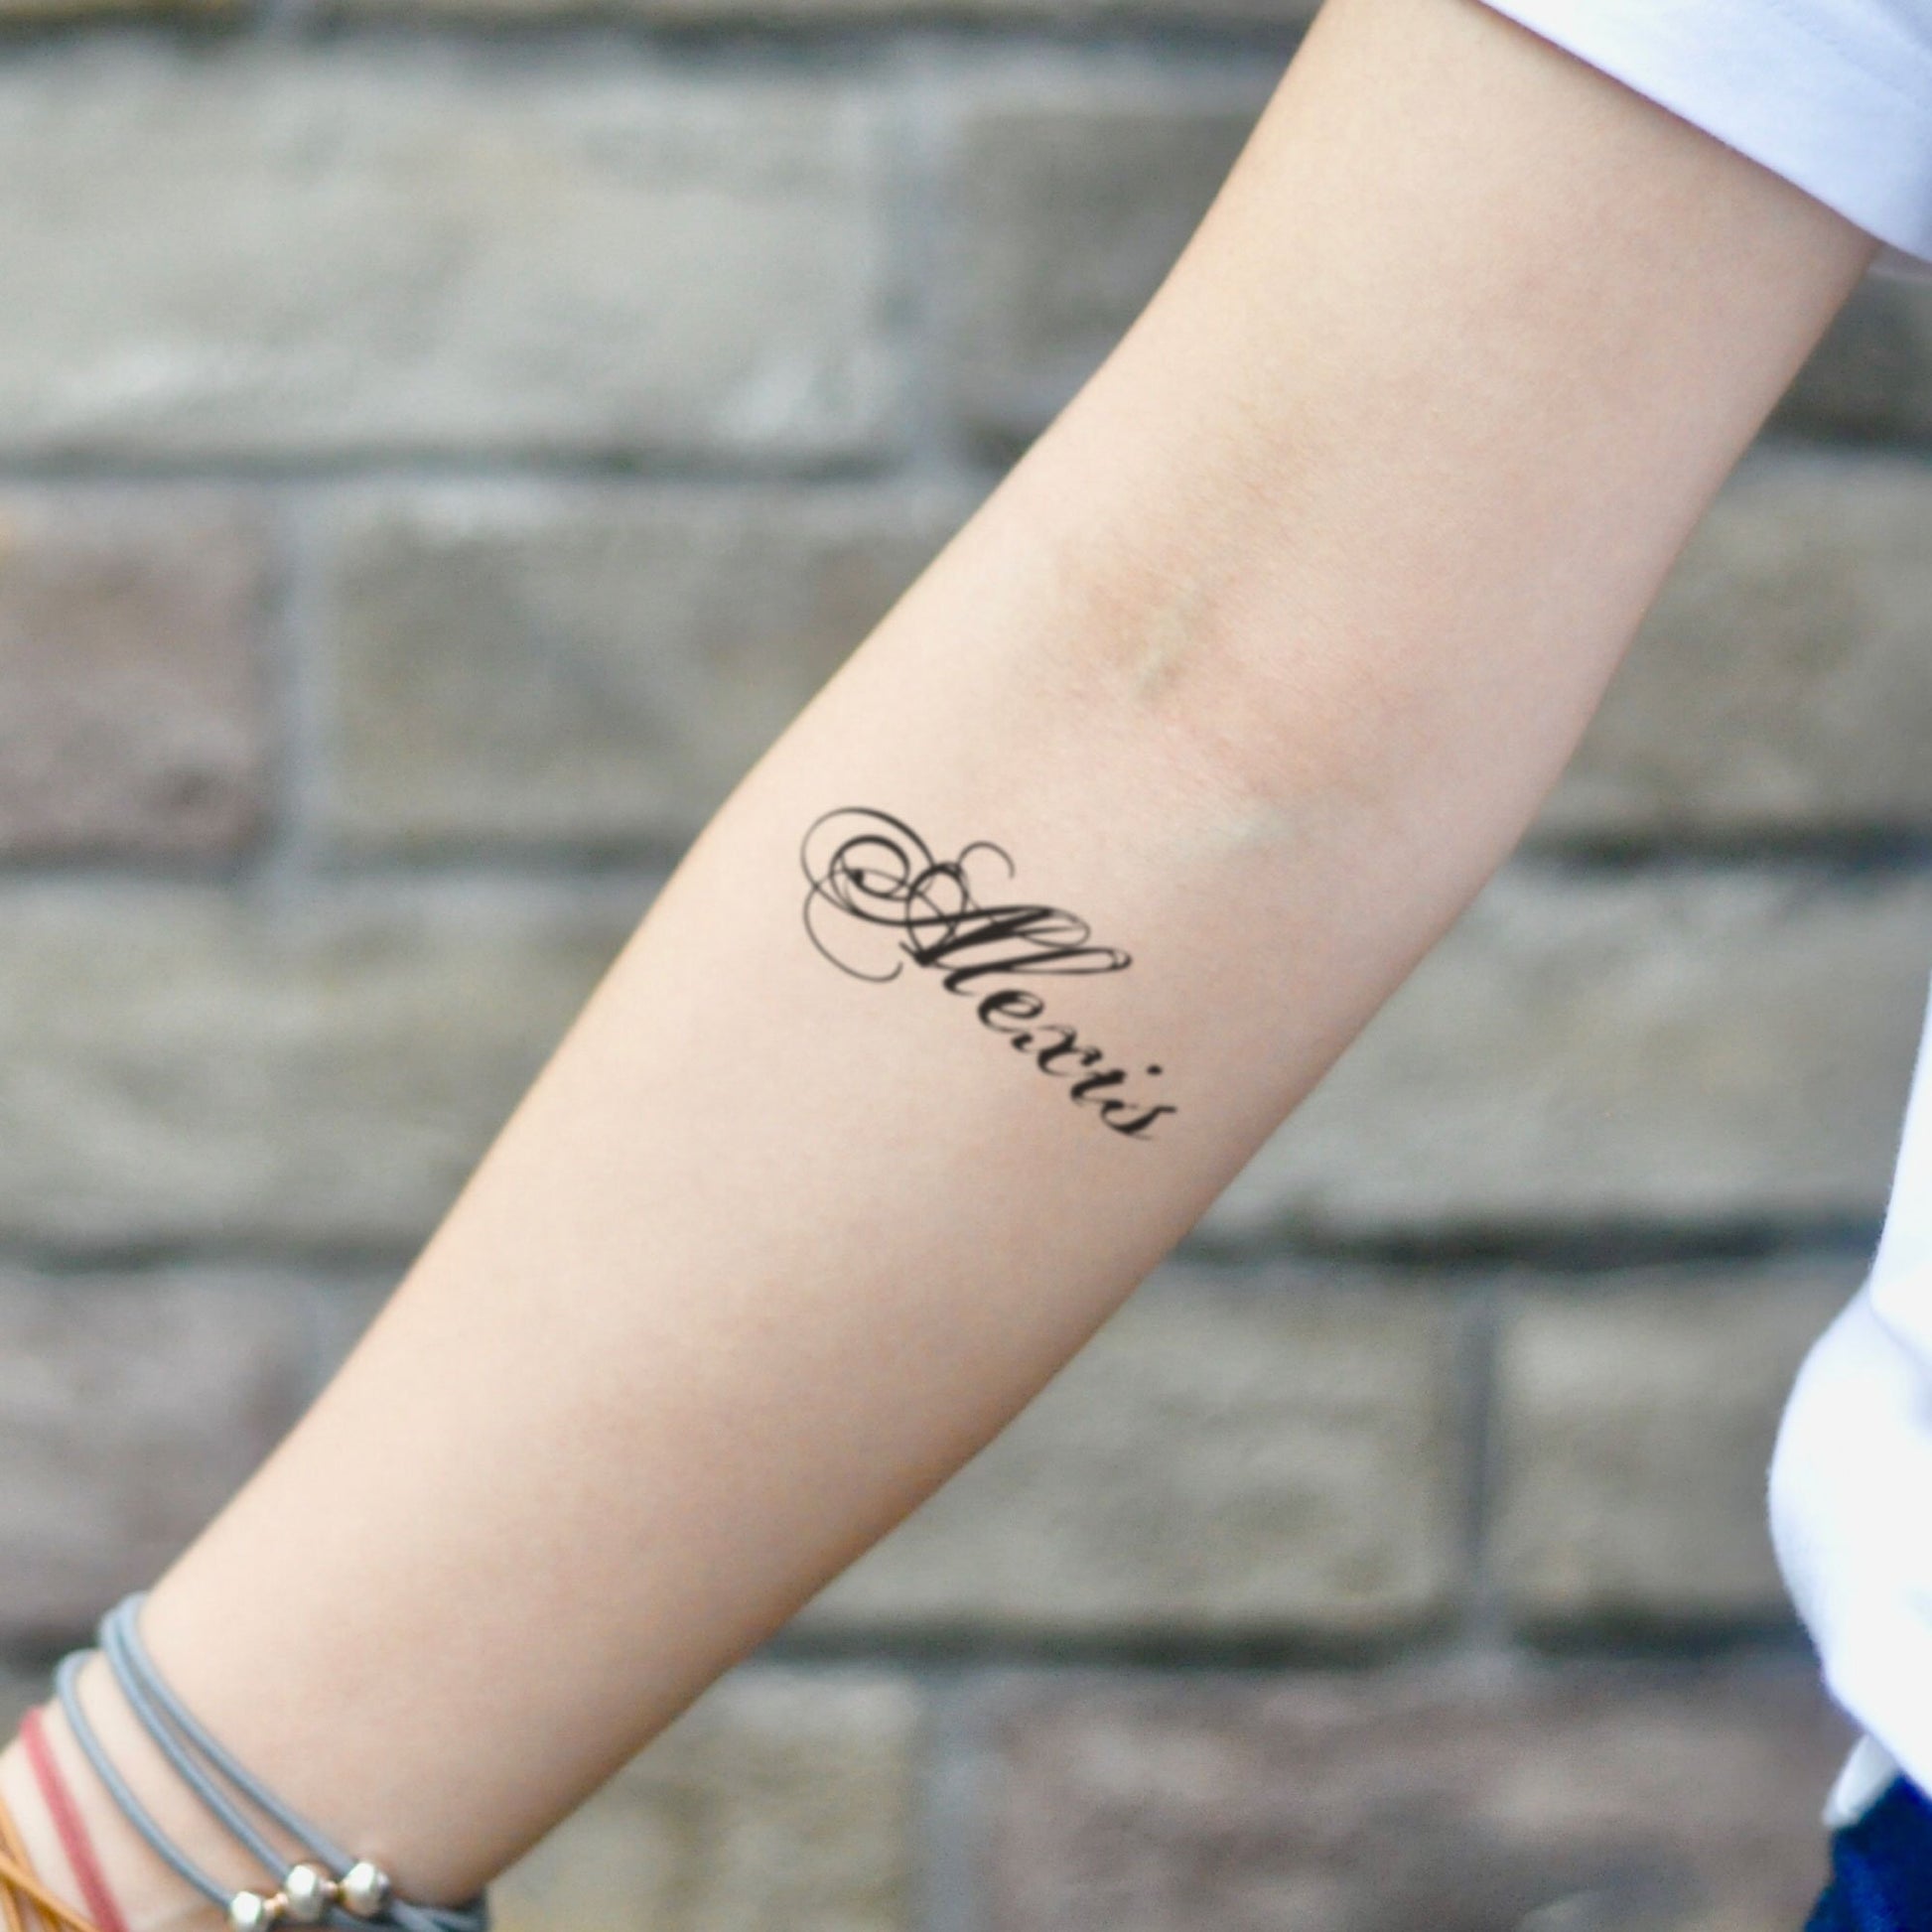 fake small alexis lettering temporary tattoo sticker design idea on inner arm